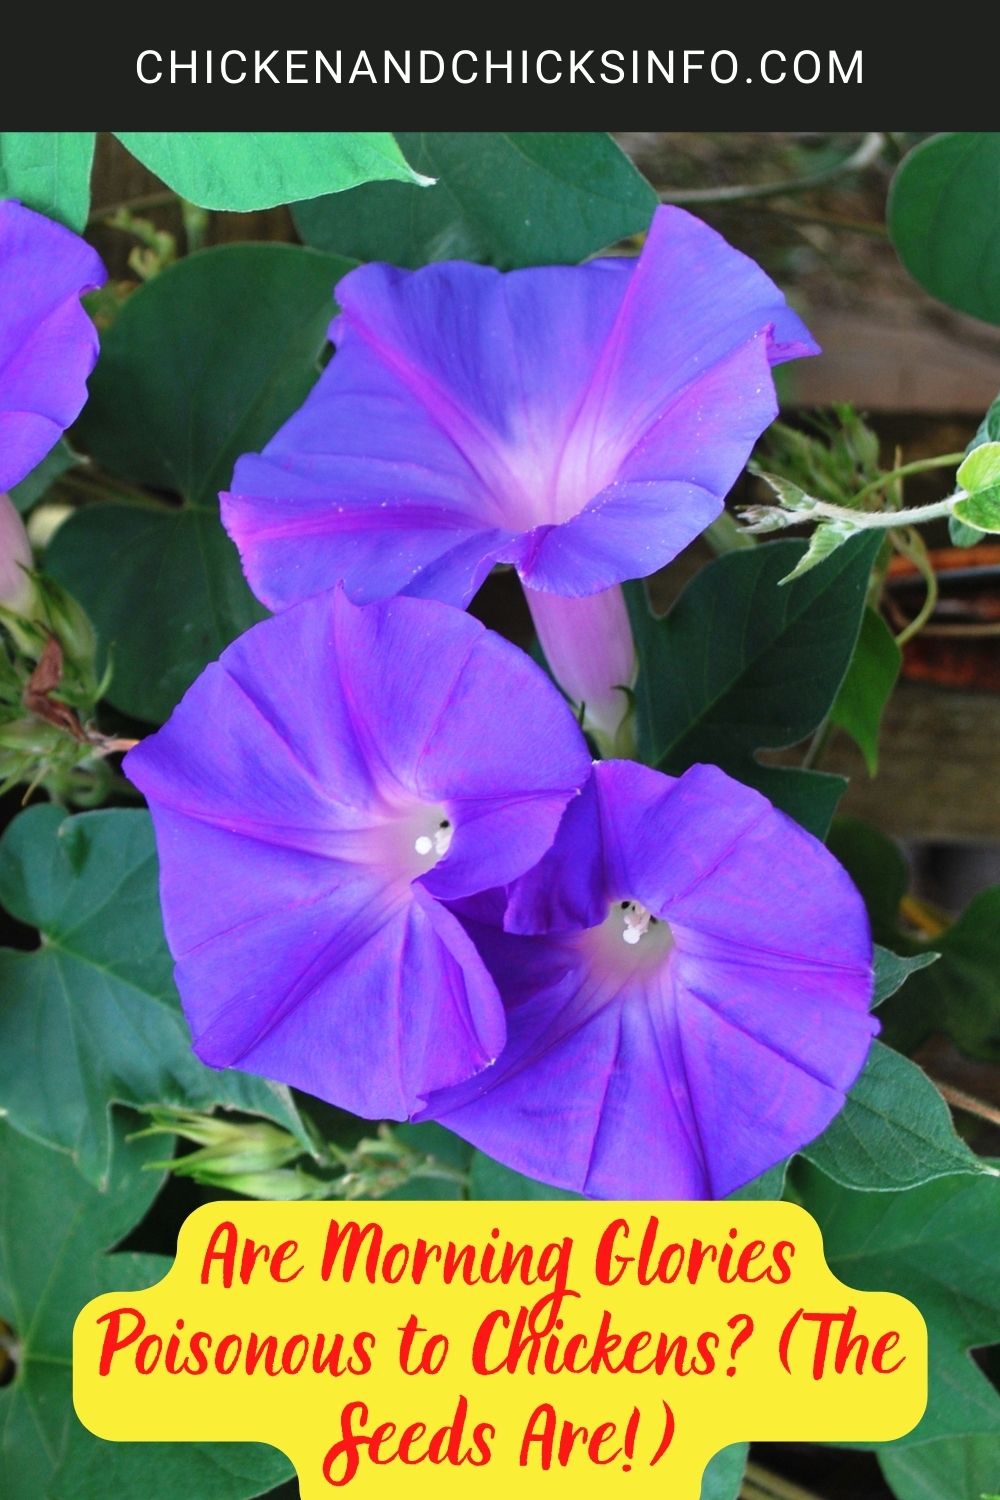 Are Morning Glories Poisonous to Chickens? (The Seeds Are!) poster.
